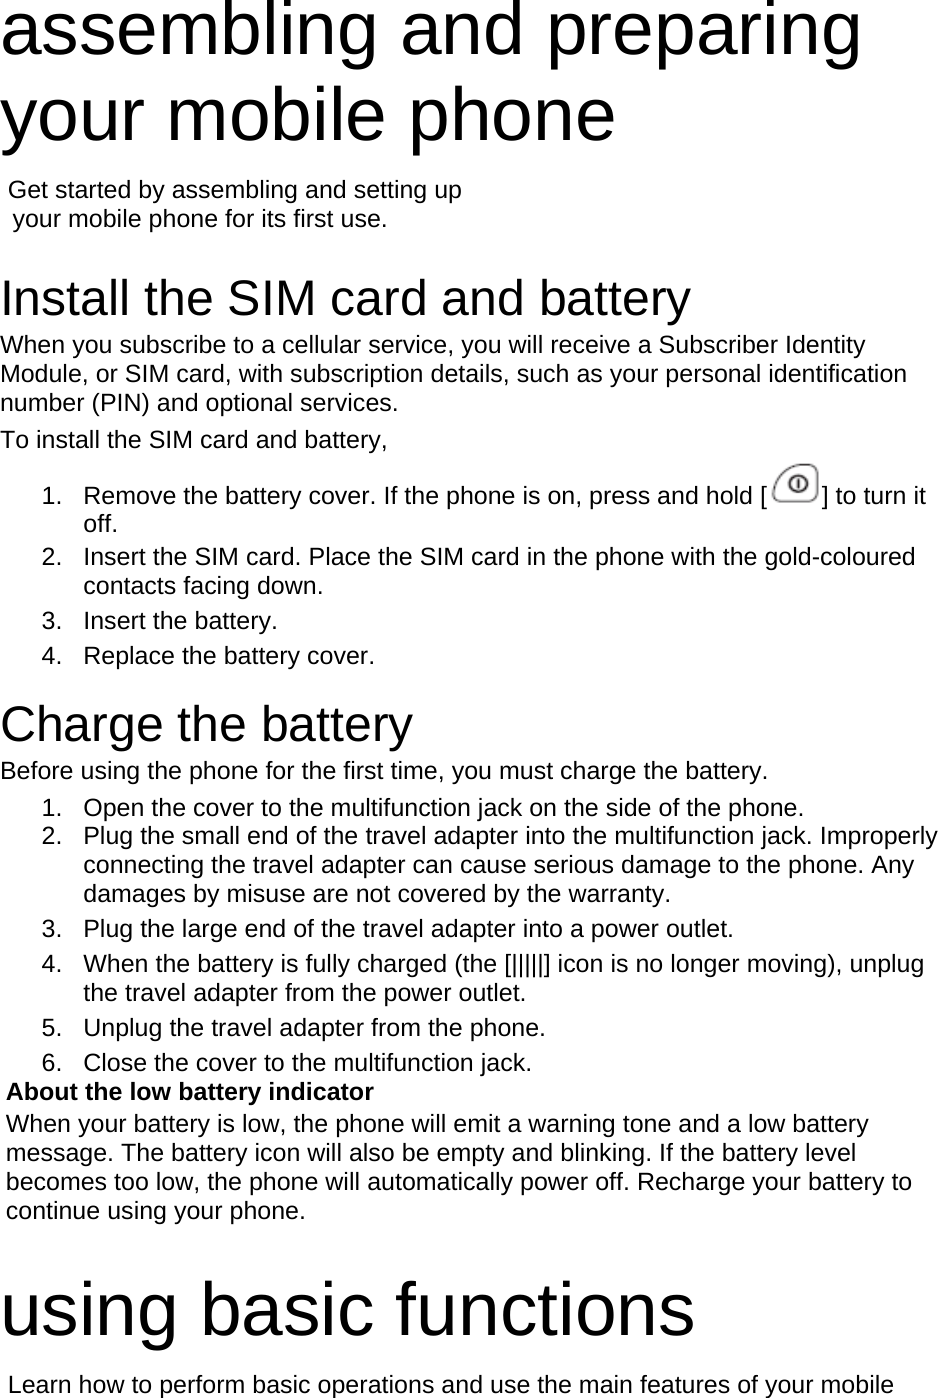 assembling and preparing your mobile phone    Get started by assembling and setting up     your mobile phone for its first use.  Install the SIM card and battery When you subscribe to a cellular service, you will receive a Subscriber Identity Module, or SIM card, with subscription details, such as your personal identification number (PIN) and optional services. To install the SIM card and battery, 1.  Remove the battery cover. If the phone is on, press and hold [ ] to turn it off. 2.  Insert the SIM card. Place the SIM card in the phone with the gold-coloured contacts facing down. 3. Insert the battery. 4.  Replace the battery cover.  Charge the battery Before using the phone for the first time, you must charge the battery. 1.  Open the cover to the multifunction jack on the side of the phone. 2.  Plug the small end of the travel adapter into the multifunction jack. Improperly connecting the travel adapter can cause serious damage to the phone. Any damages by misuse are not covered by the warranty. 3.  Plug the large end of the travel adapter into a power outlet. 4.  When the battery is fully charged (the [|||||] icon is no longer moving), unplug the travel adapter from the power outlet. 5.  Unplug the travel adapter from the phone. 6.  Close the cover to the multifunction jack. About the low battery indicator When your battery is low, the phone will emit a warning tone and a low battery message. The battery icon will also be empty and blinking. If the battery level becomes too low, the phone will automatically power off. Recharge your battery to continue using your phone.  using basic functions  Learn how to perform basic operations and use the main features of your mobile 